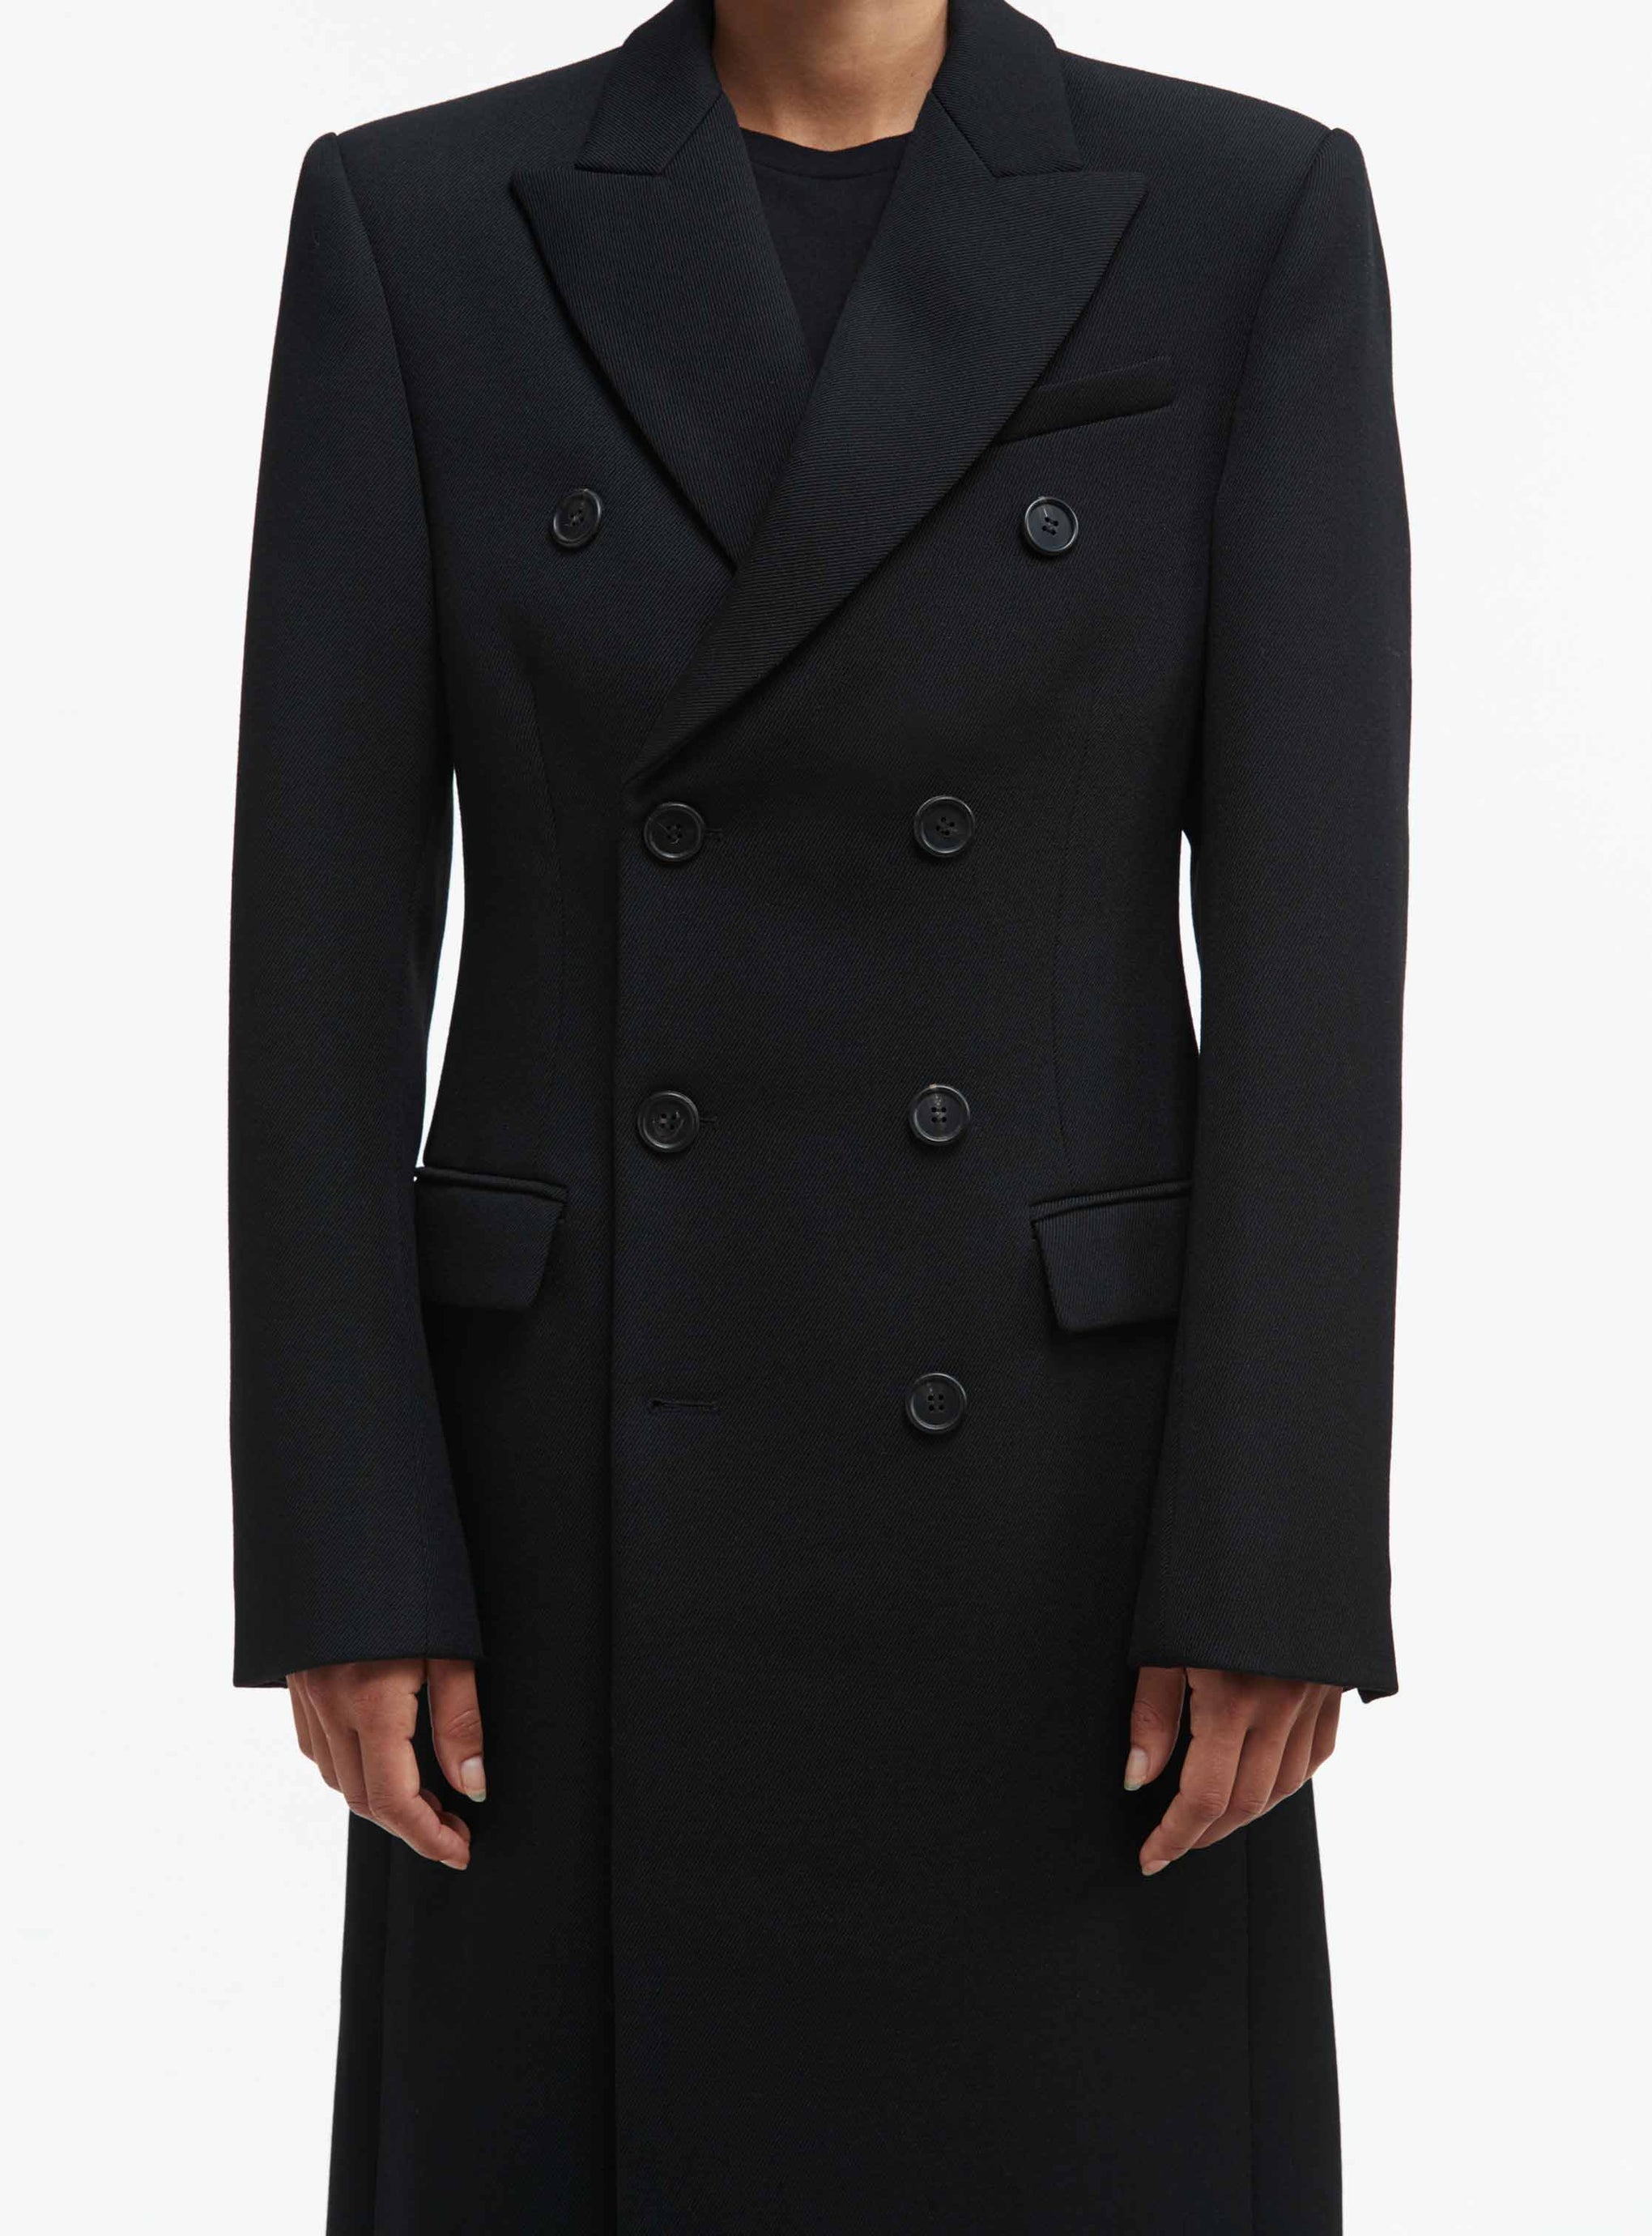 The Wardrobe NYC Double Breasted Coat in Black available at The New Trend Australia